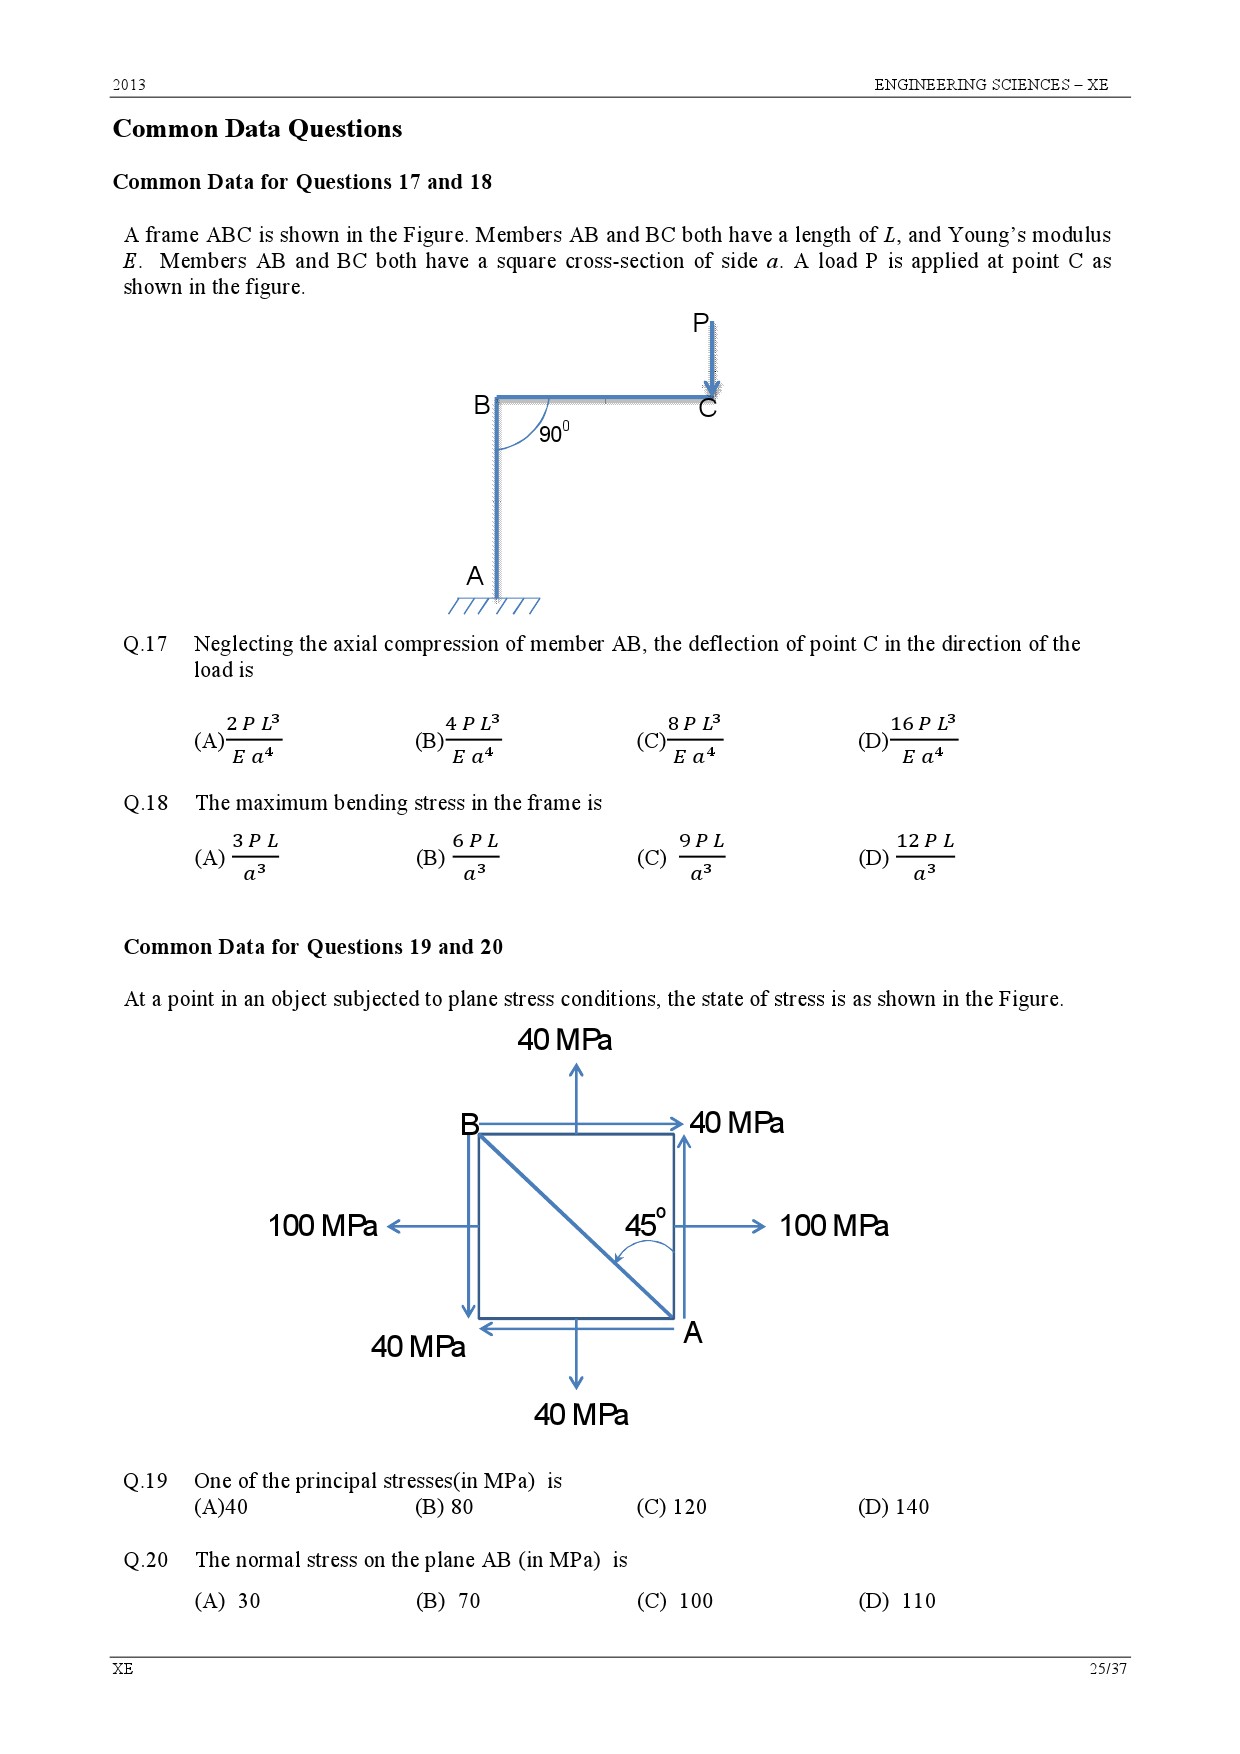 GATE Exam Question Paper 2013 Engineering Sciences 25